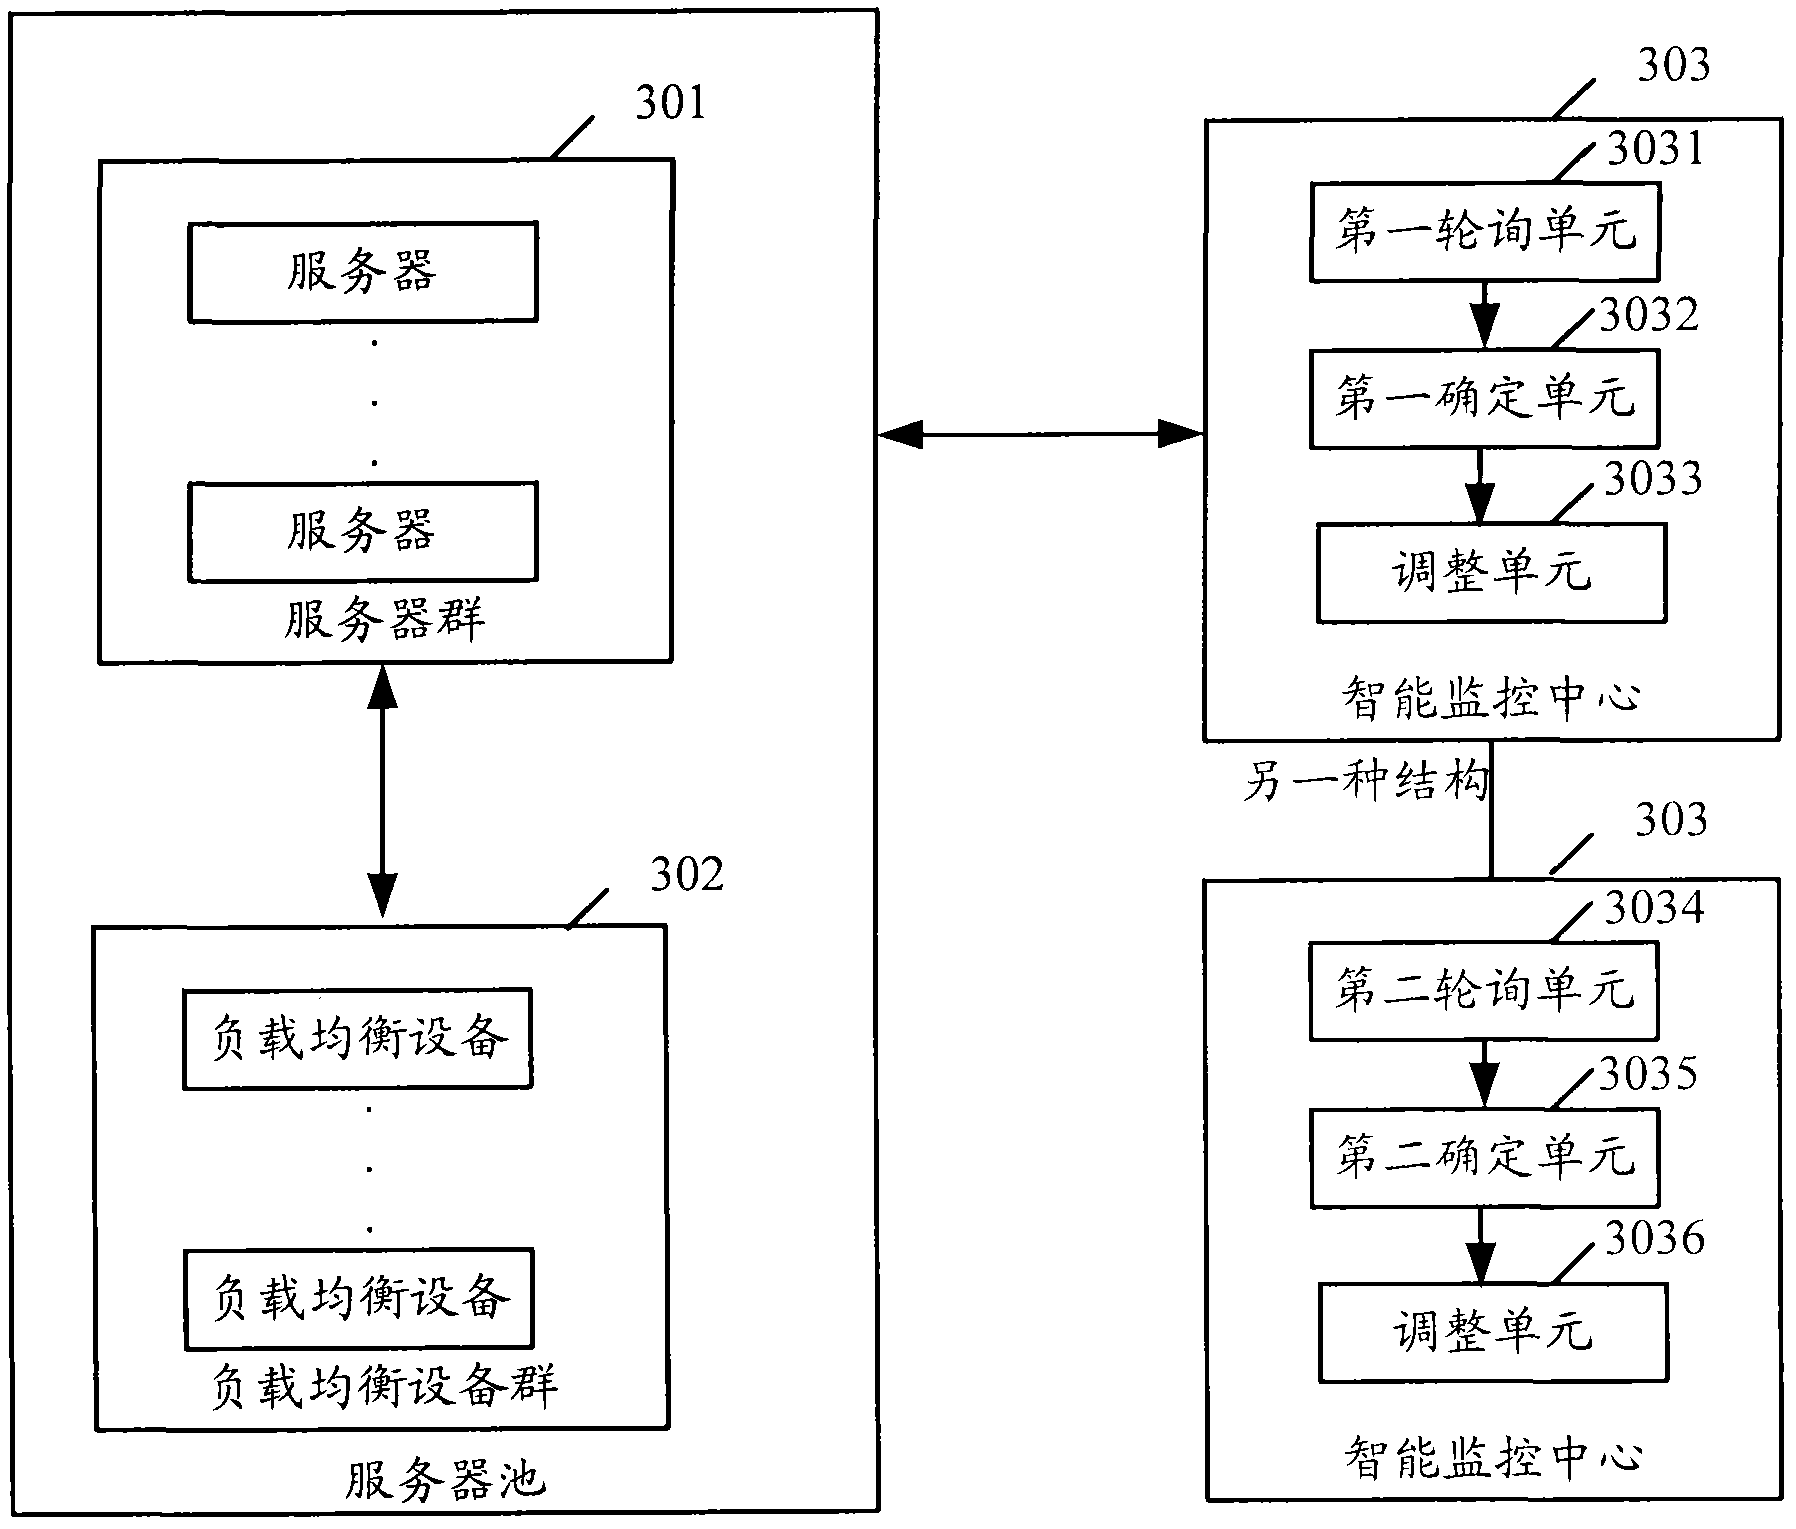 Method and system for realizing intelligent monitoring